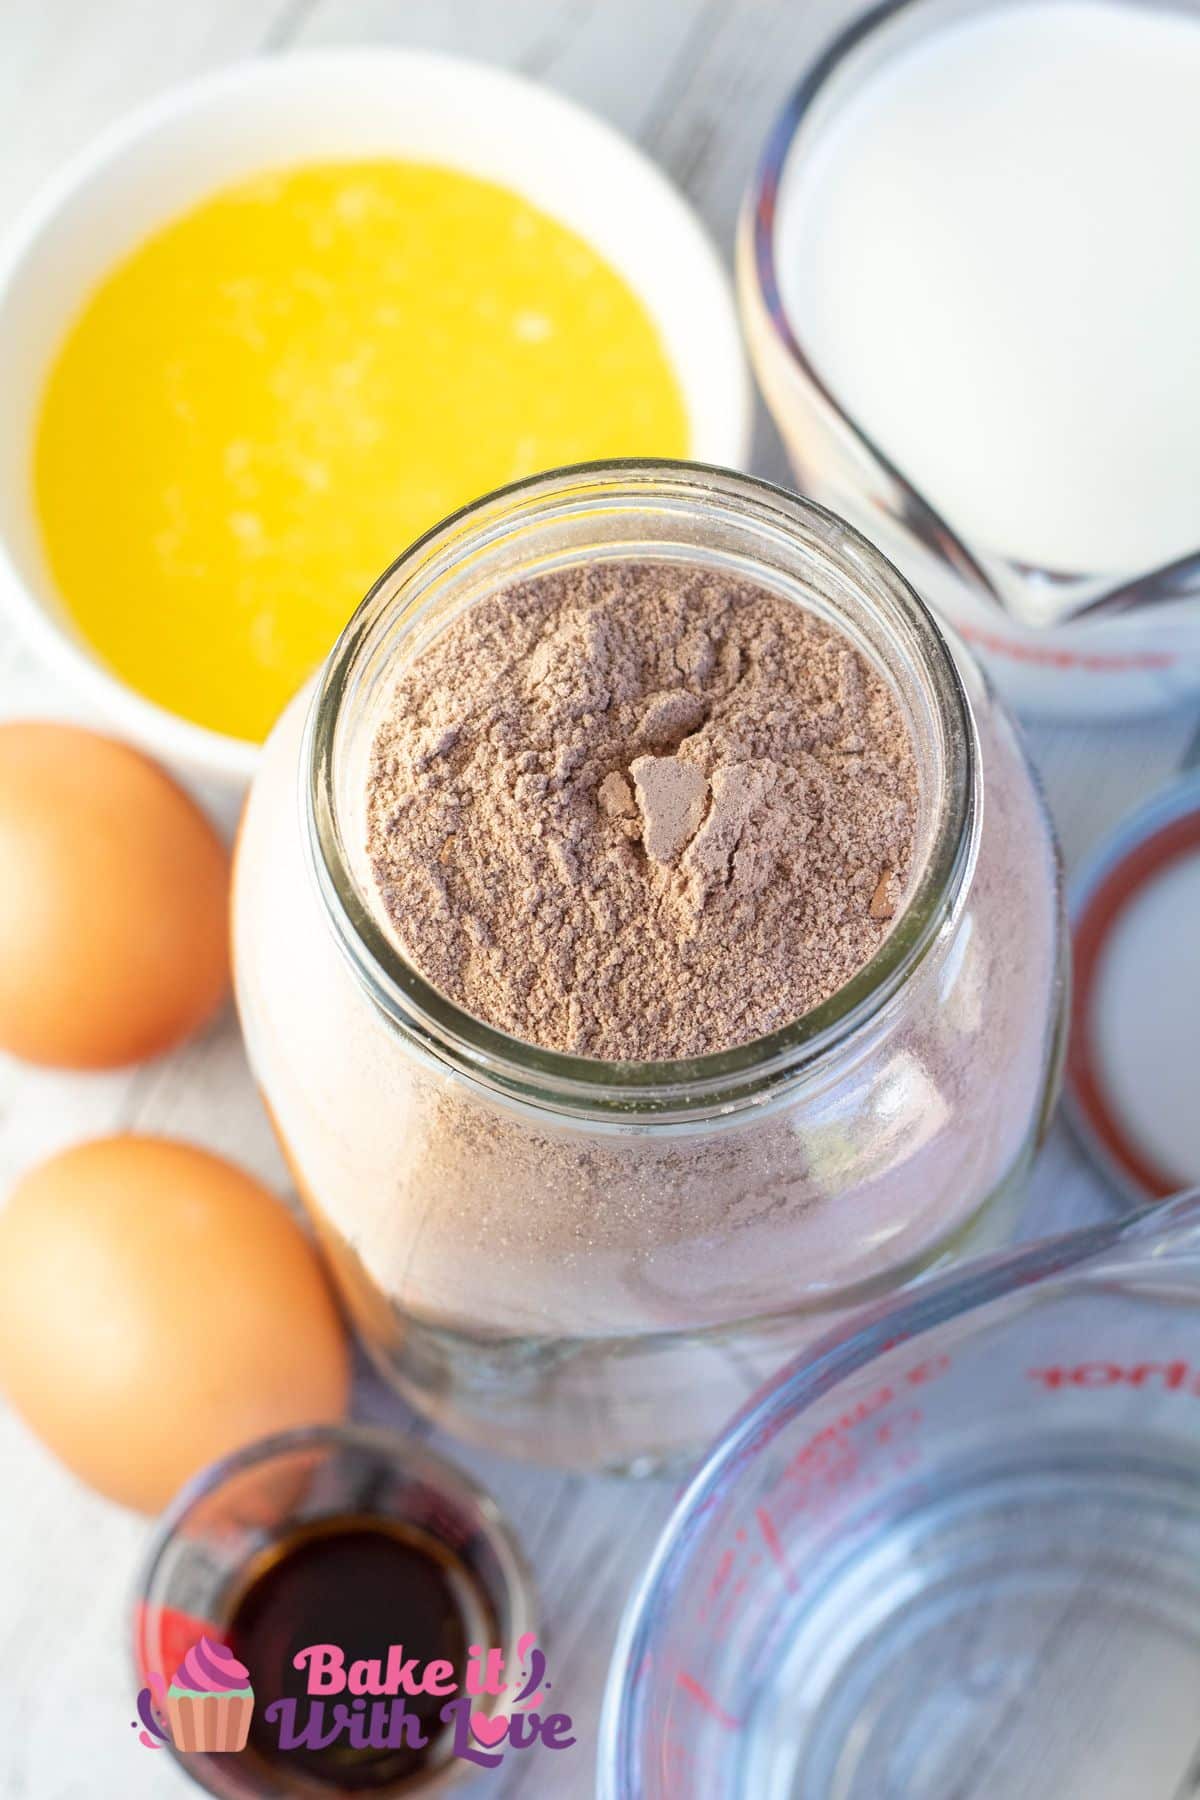 Tall image of chocolate cake mix in a mason jar with other cake ingredients around.